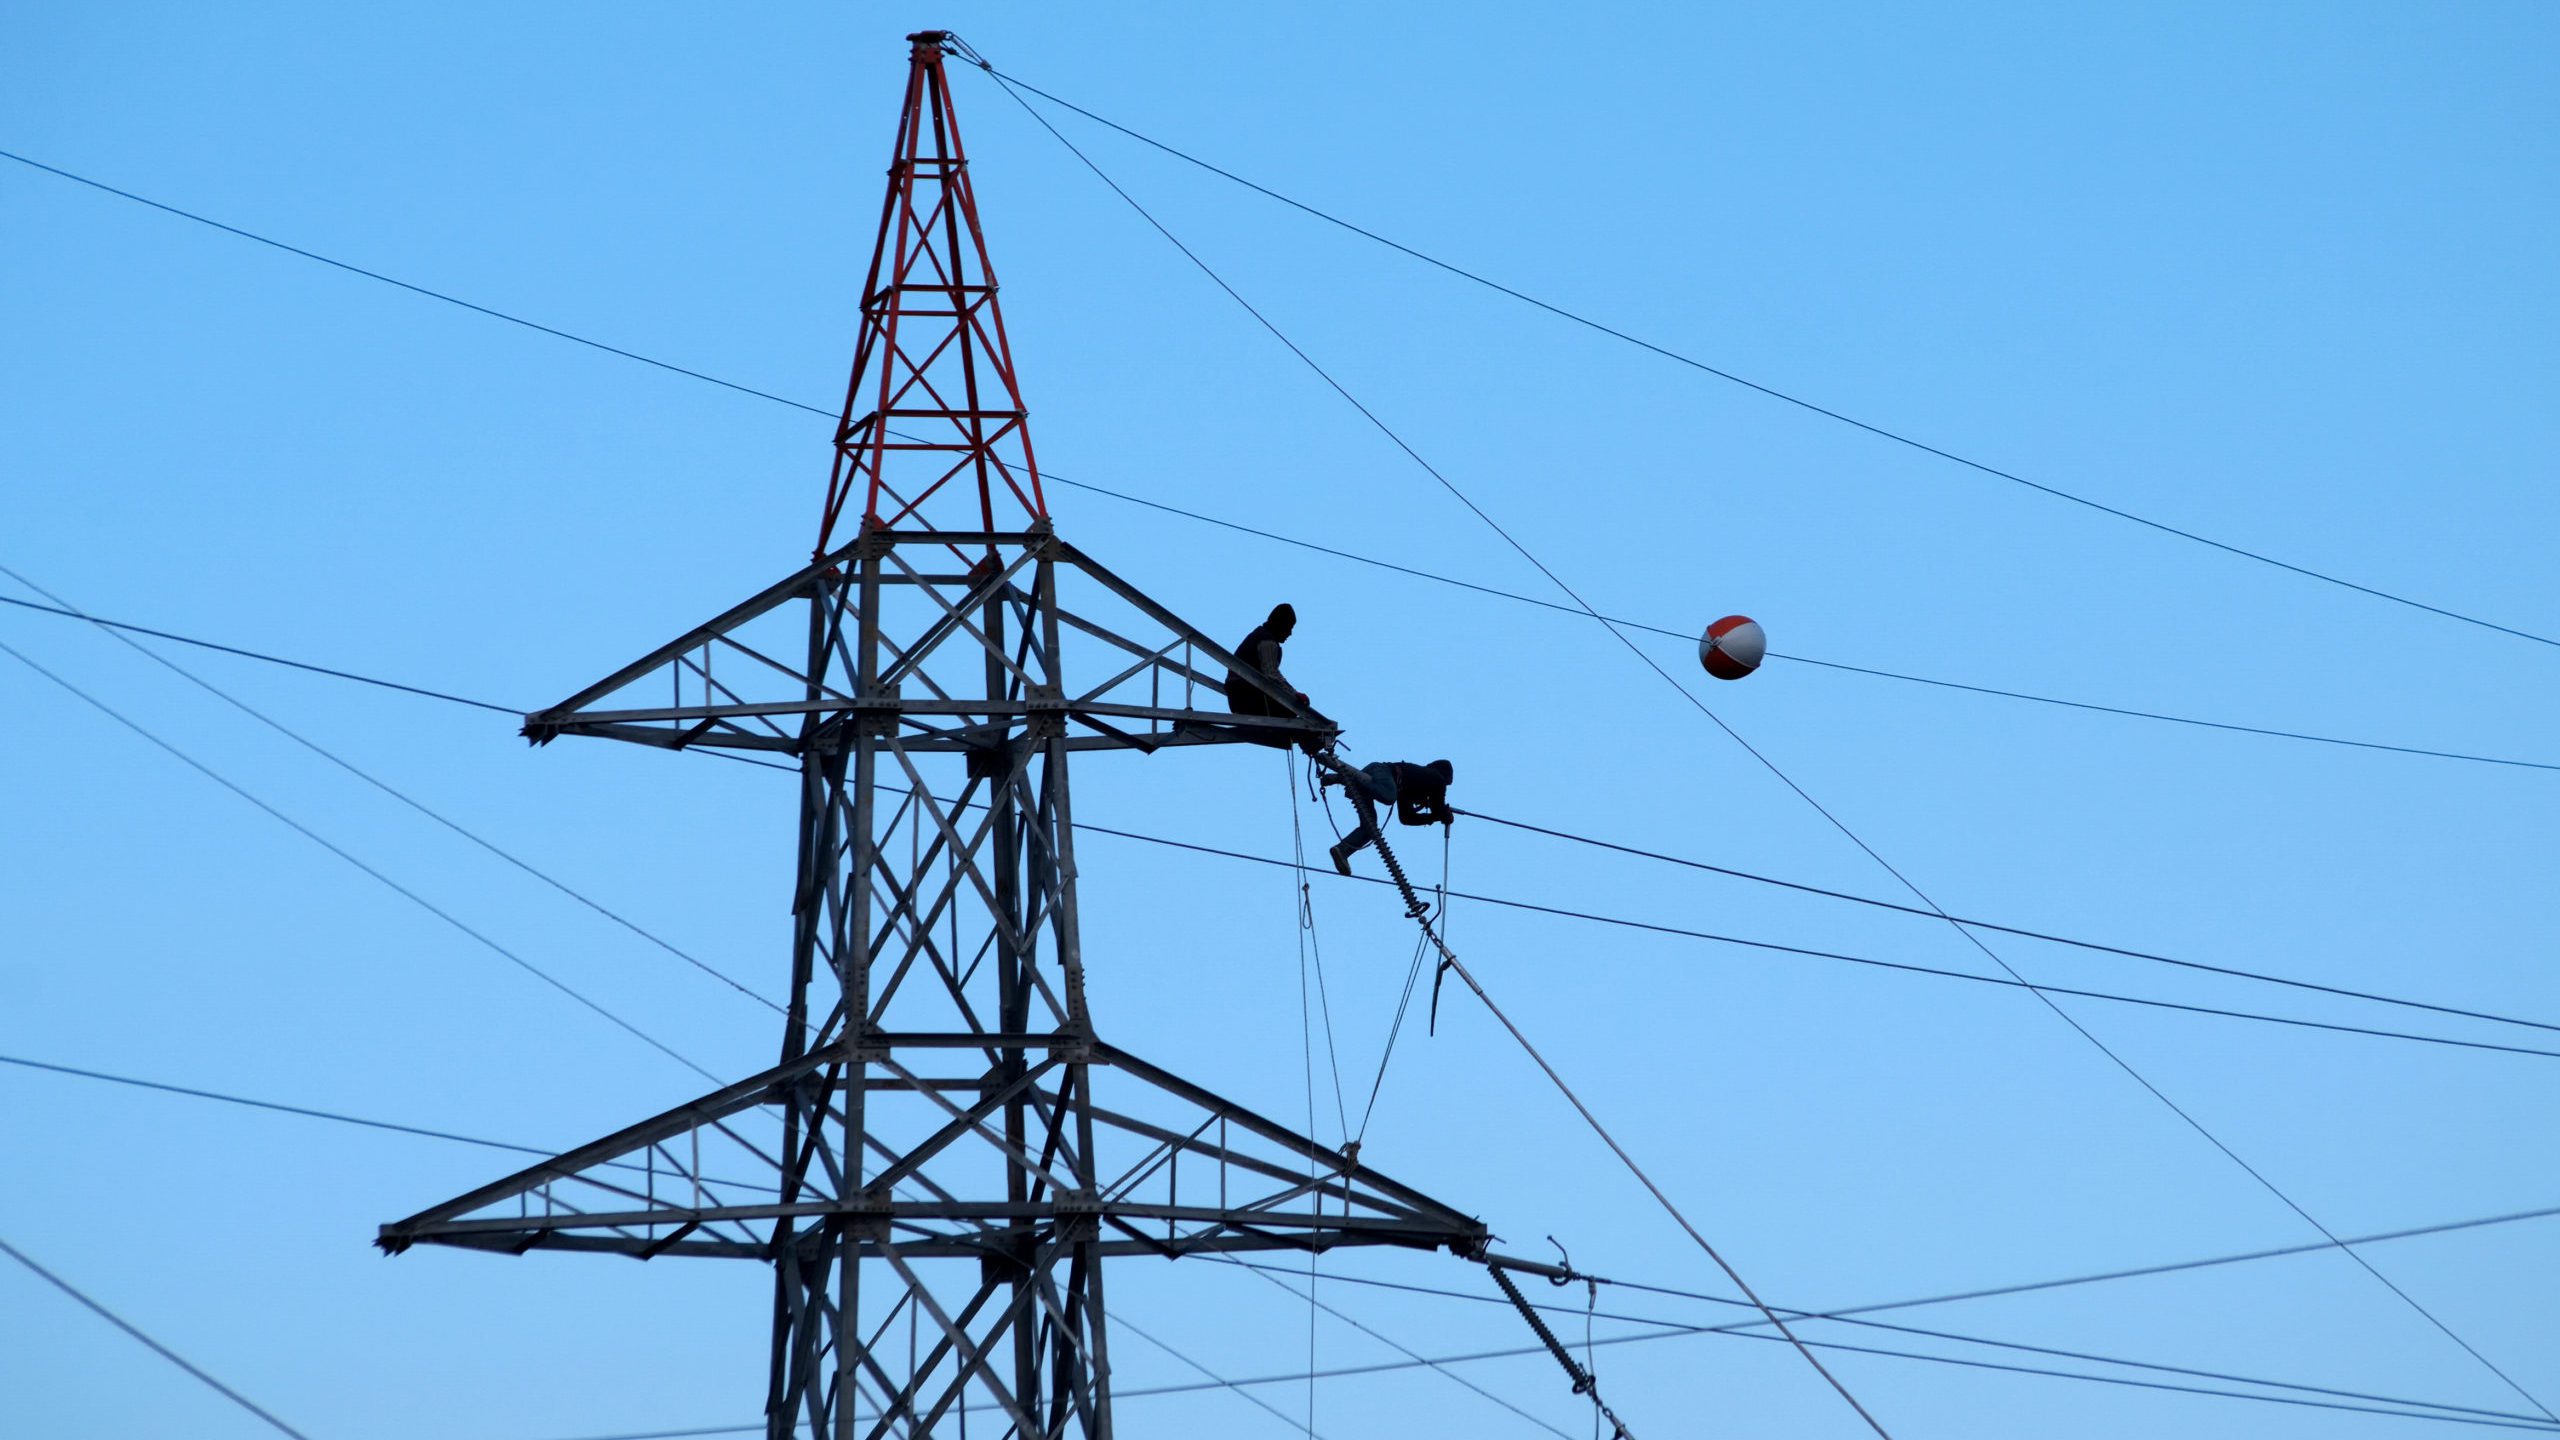 People working in a high risk environment on top of a power pylon